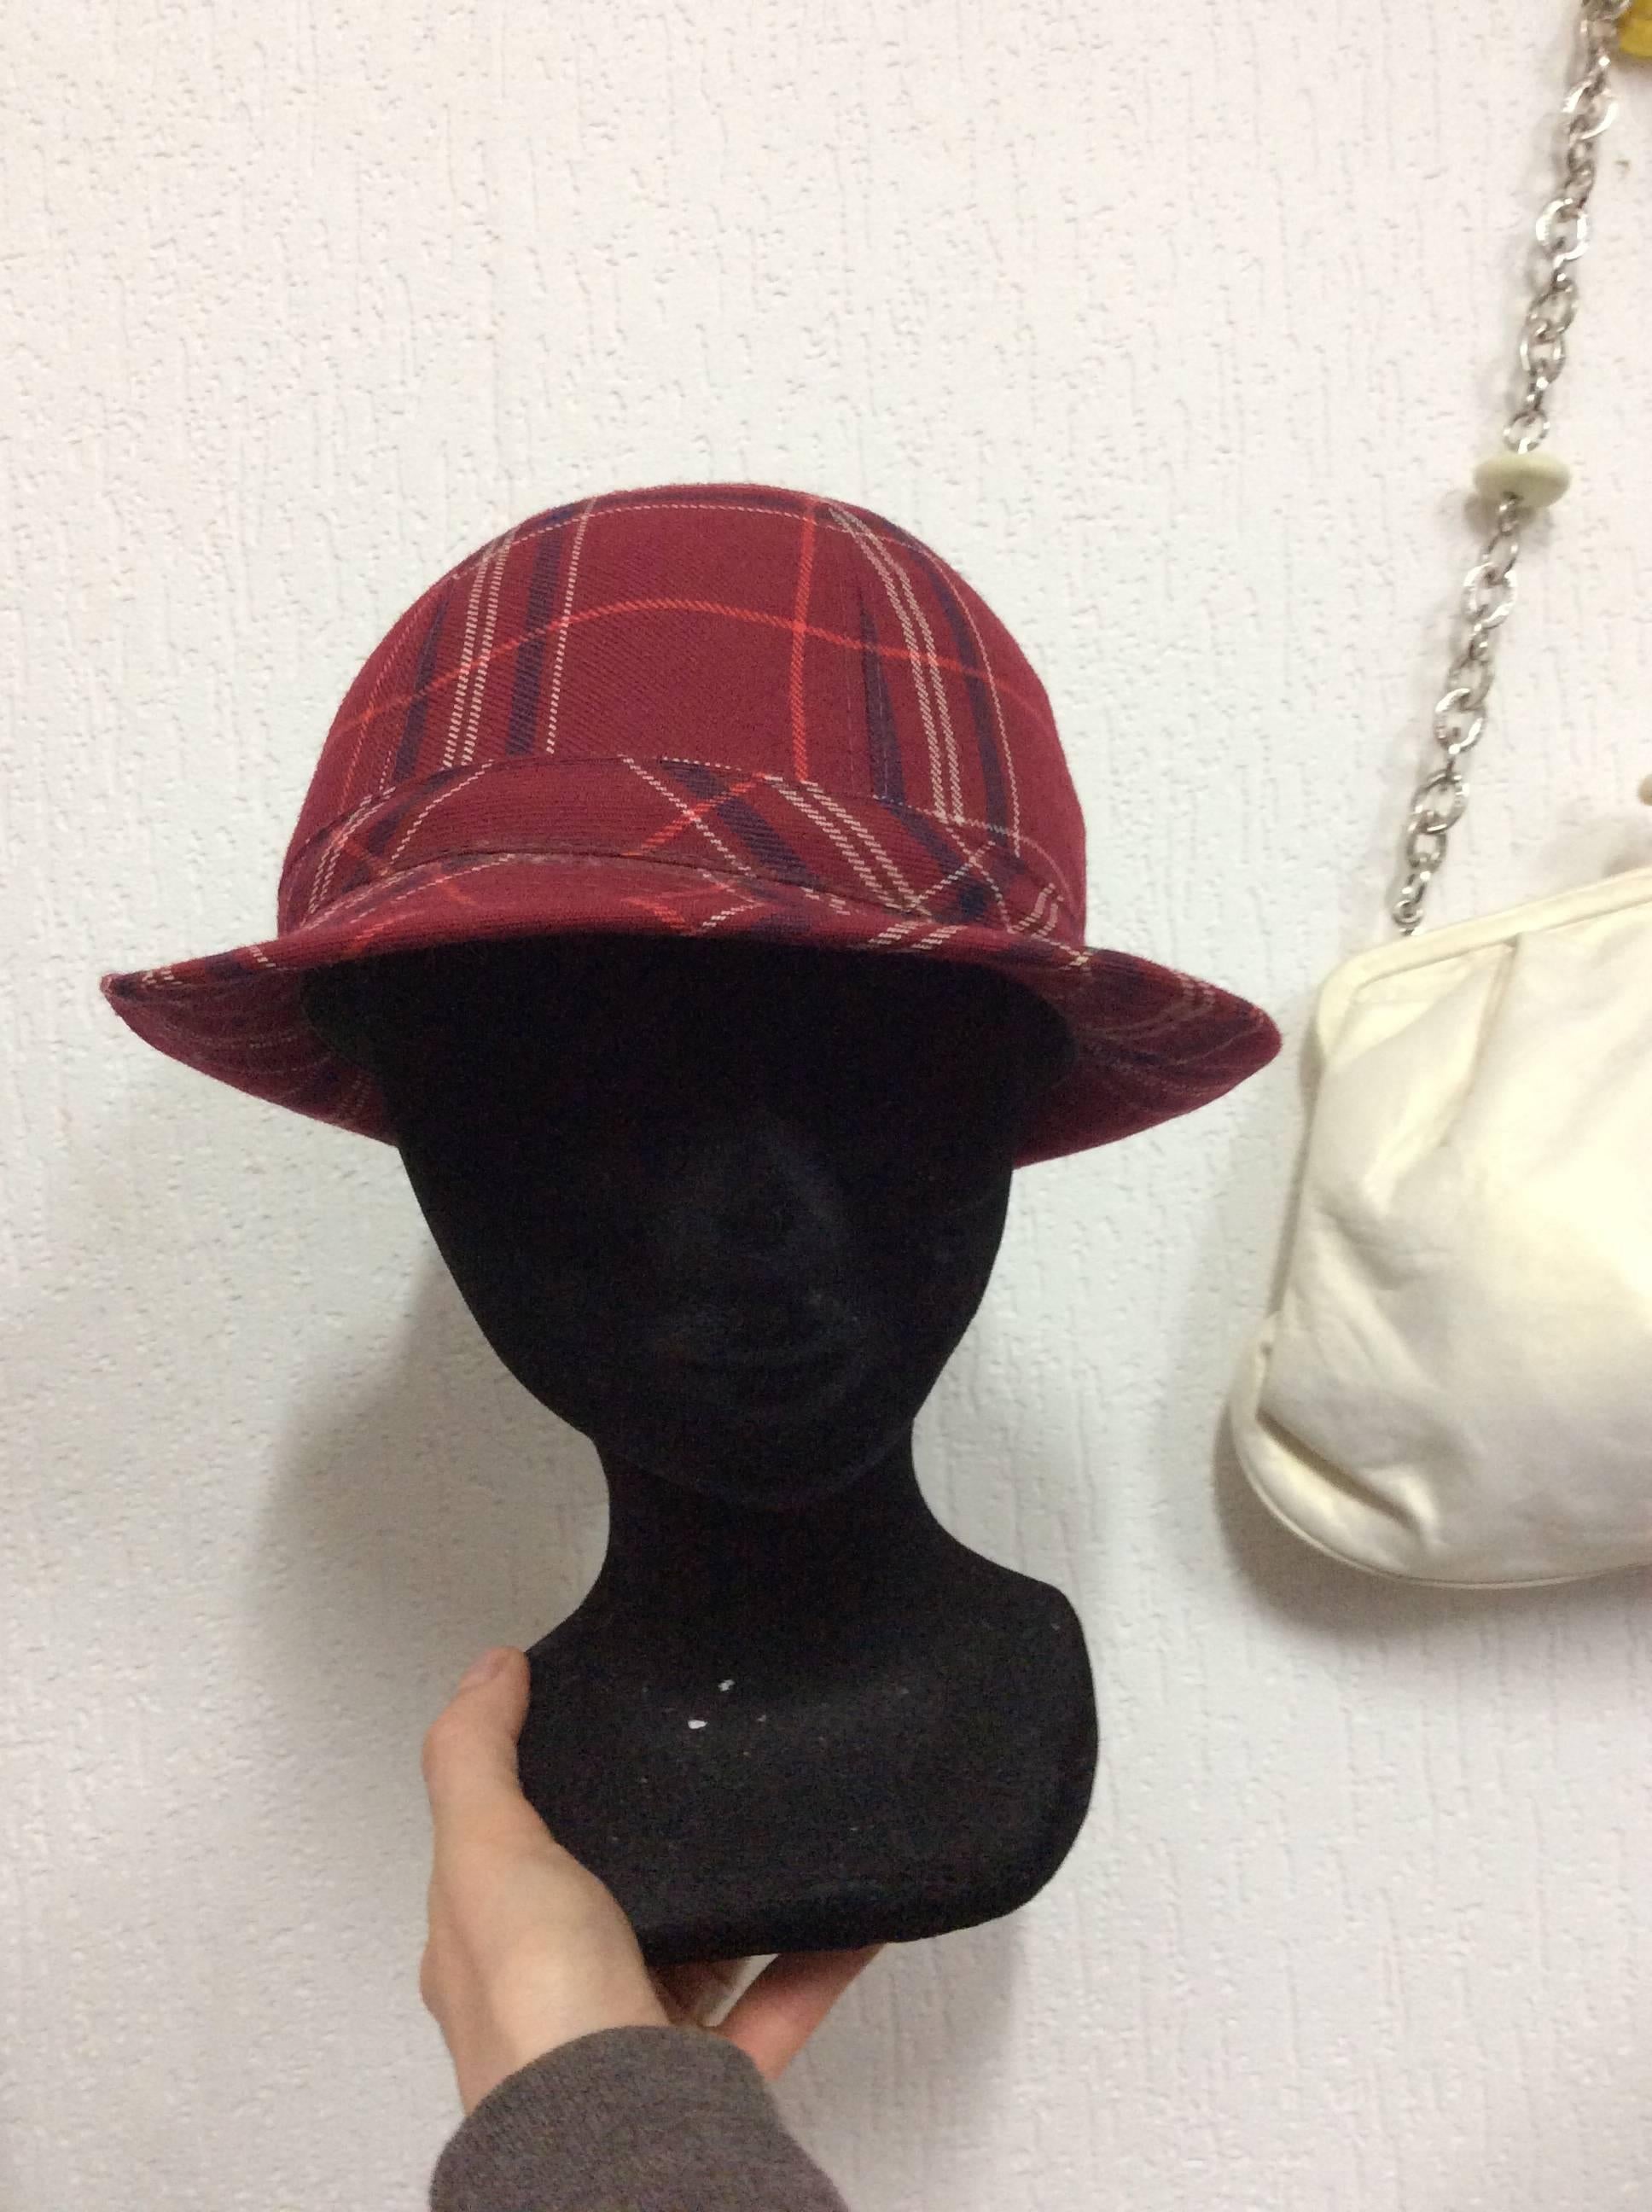 Plaid 1970's Hat In Excellent Condition For Sale In Boca Raton, FL